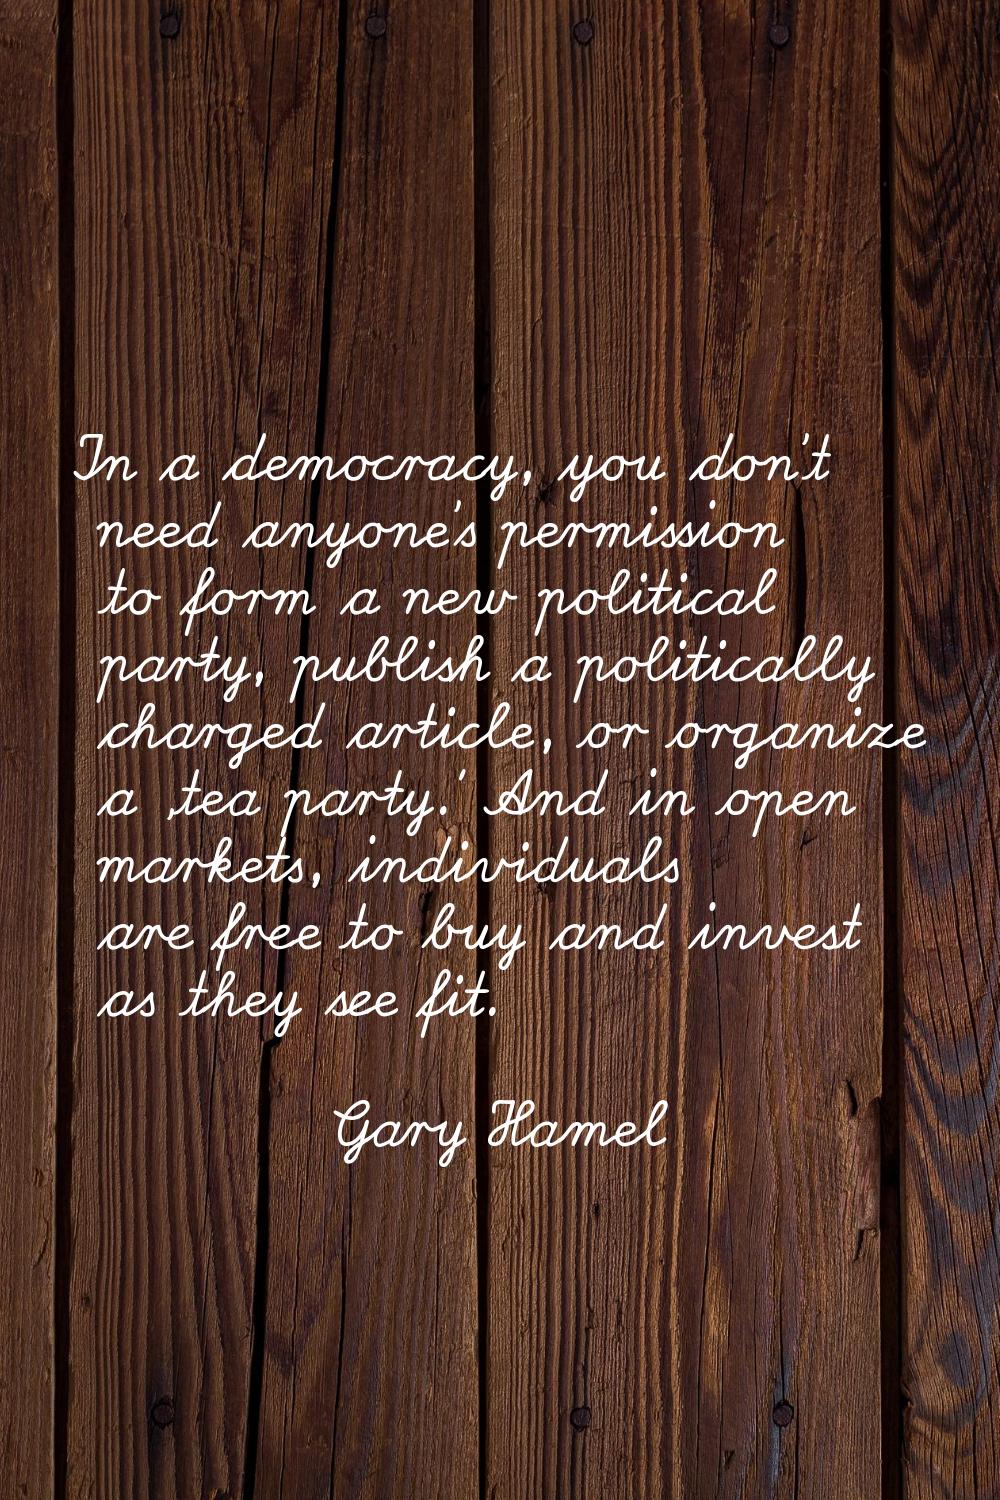 In a democracy, you don't need anyone's permission to form a new political party, publish a politic